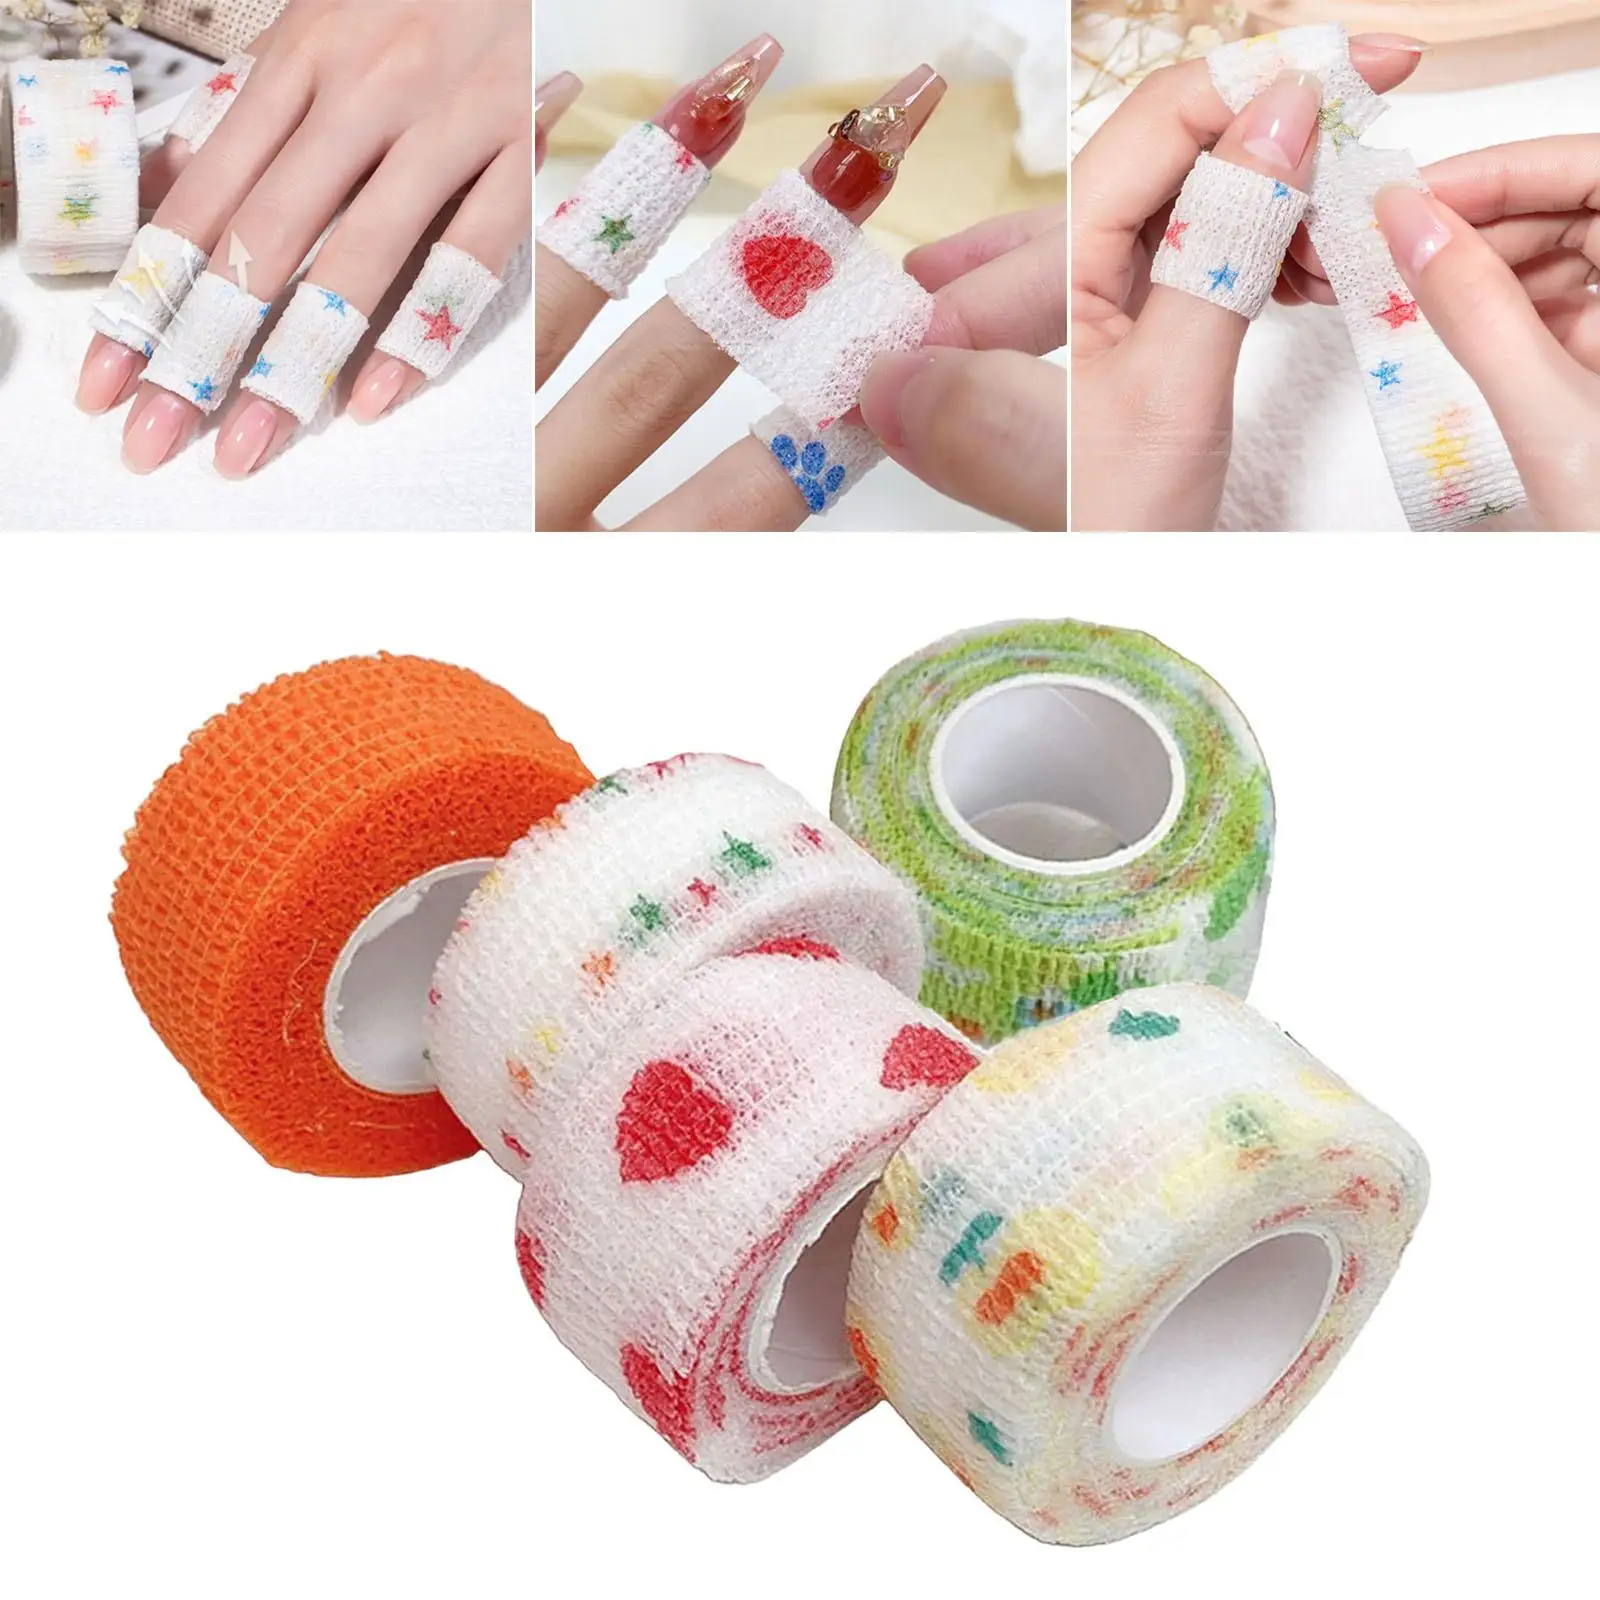 5 Pieces Self Adherent Cohesive Bandages Non Woven , Used for Finger Protection